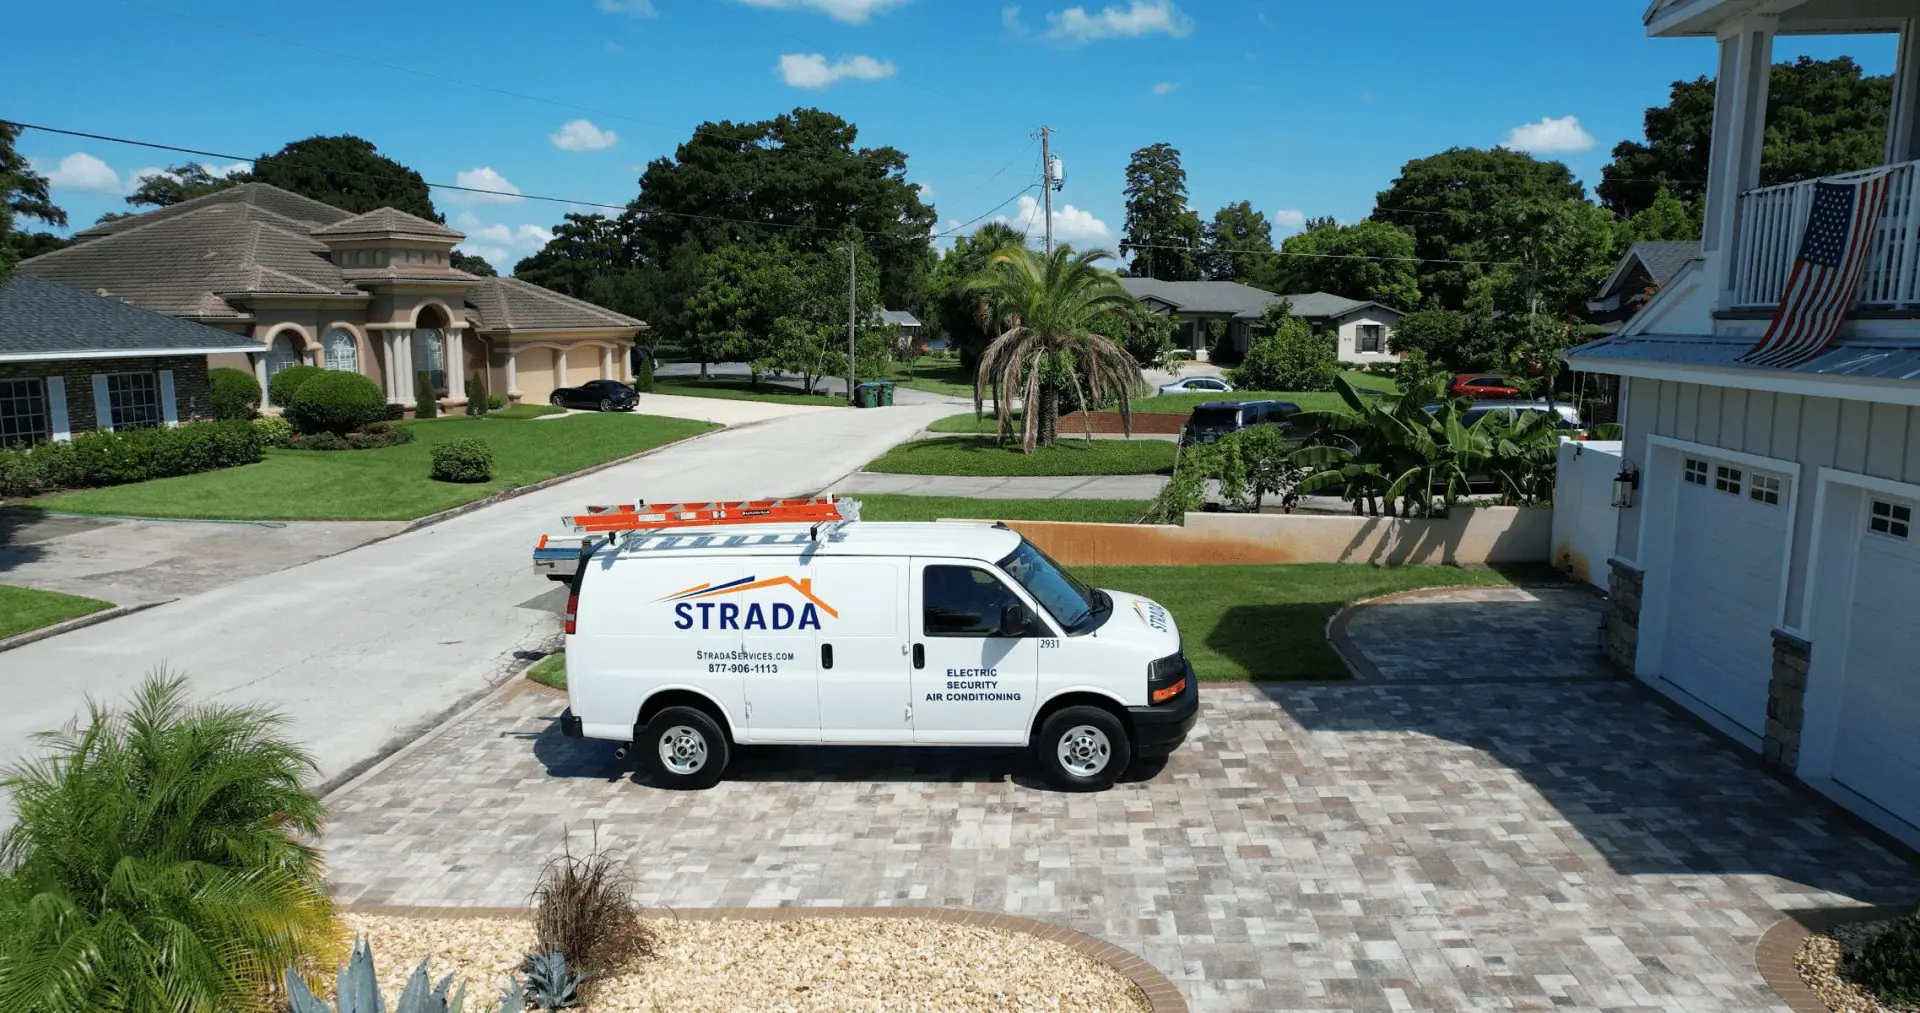 A white Strada Services utility van with an orange ladder on the roof is parked in a driveway.